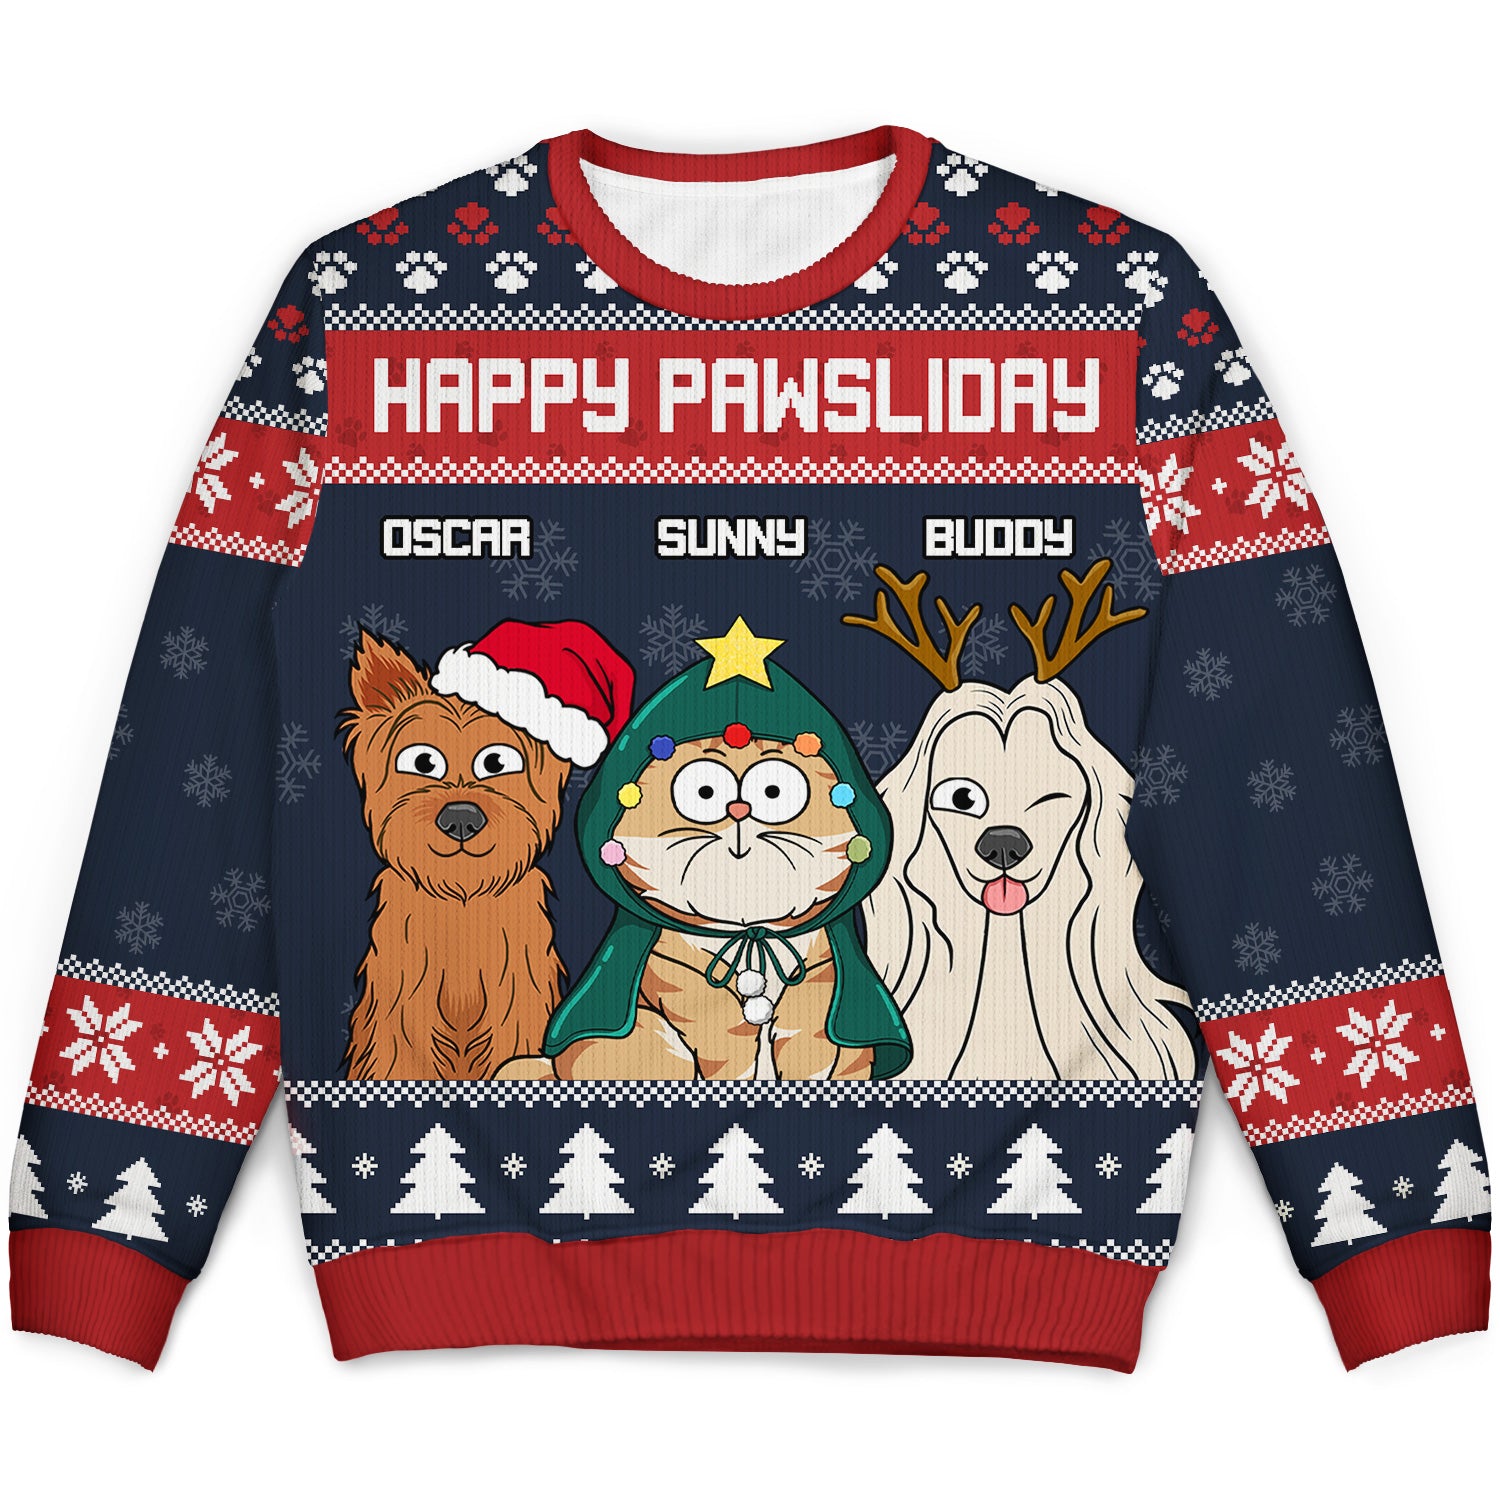 Happy Pawsliday - Christmas Gift For Dog Lovers, Cat Lovers - Personalized Unisex Ugly Sweater